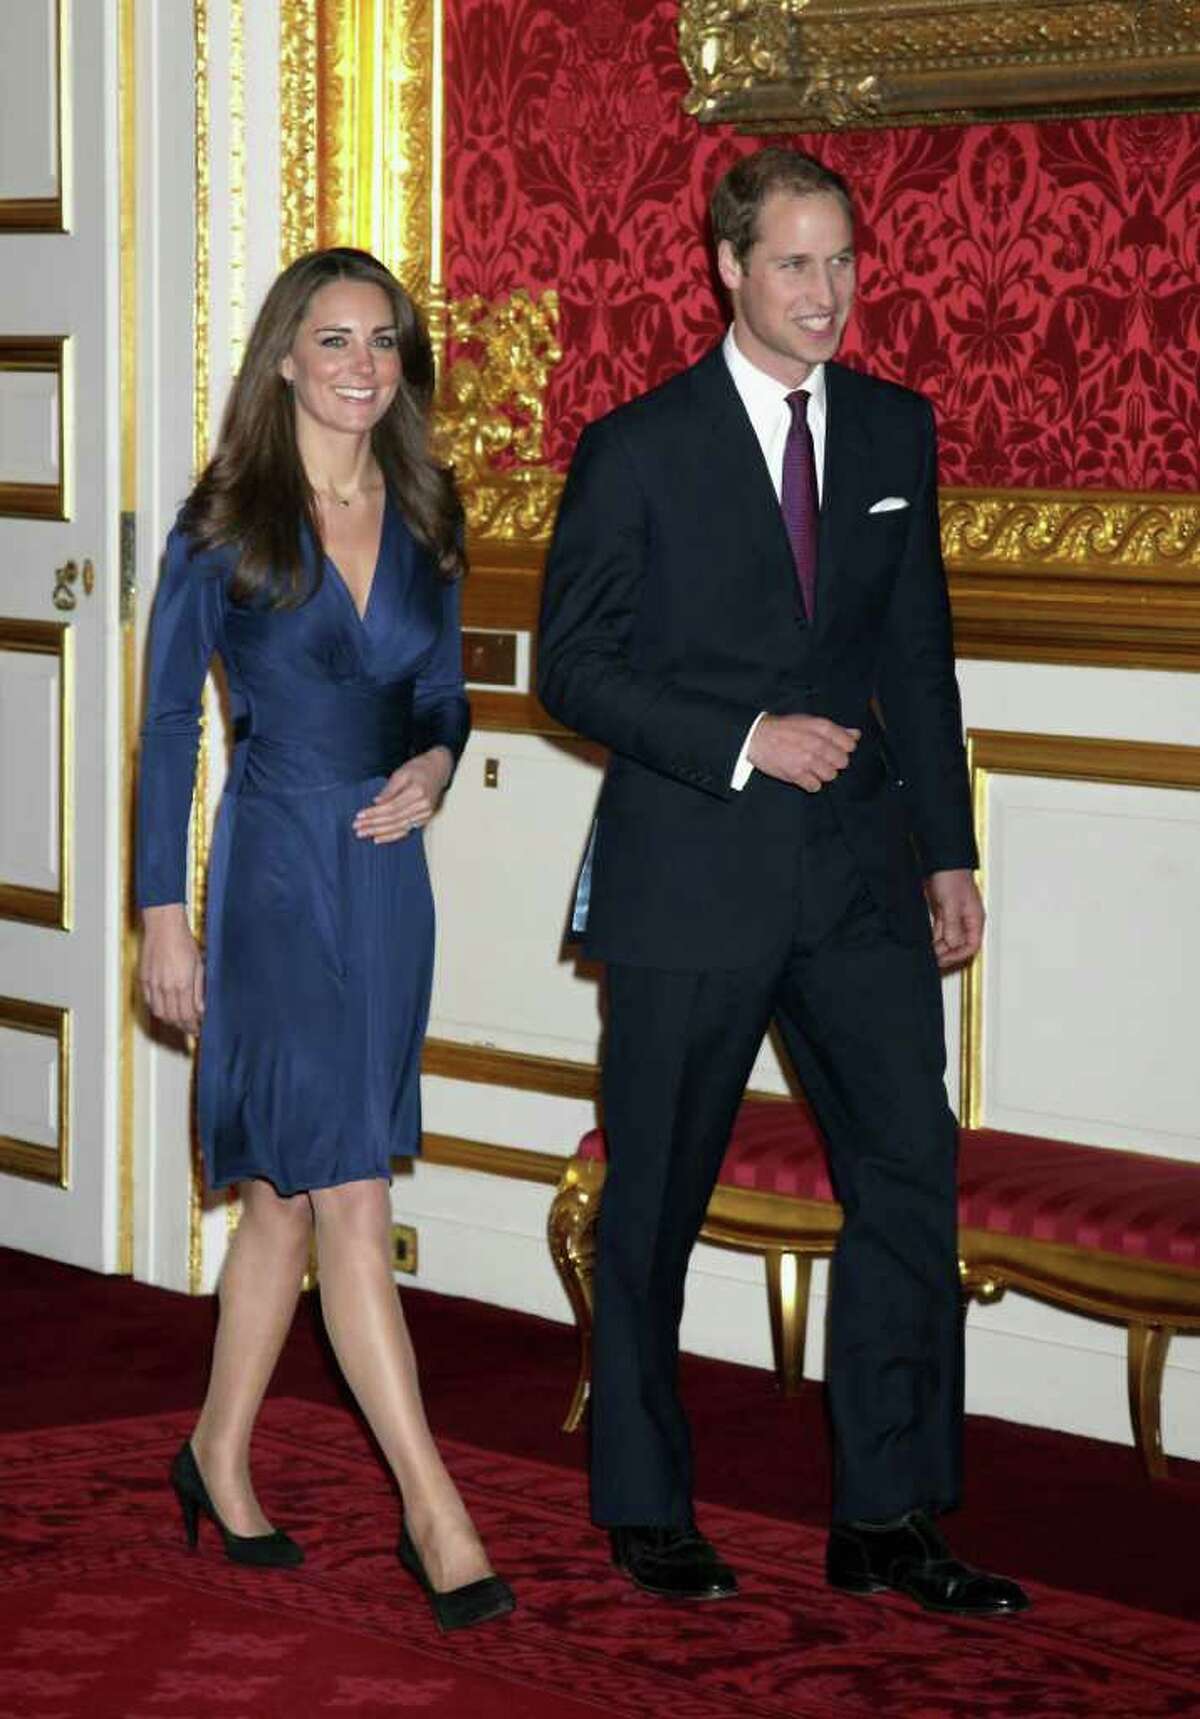 The world watched as the beaming royal couple prepared to announce their engagement in November, 2010.